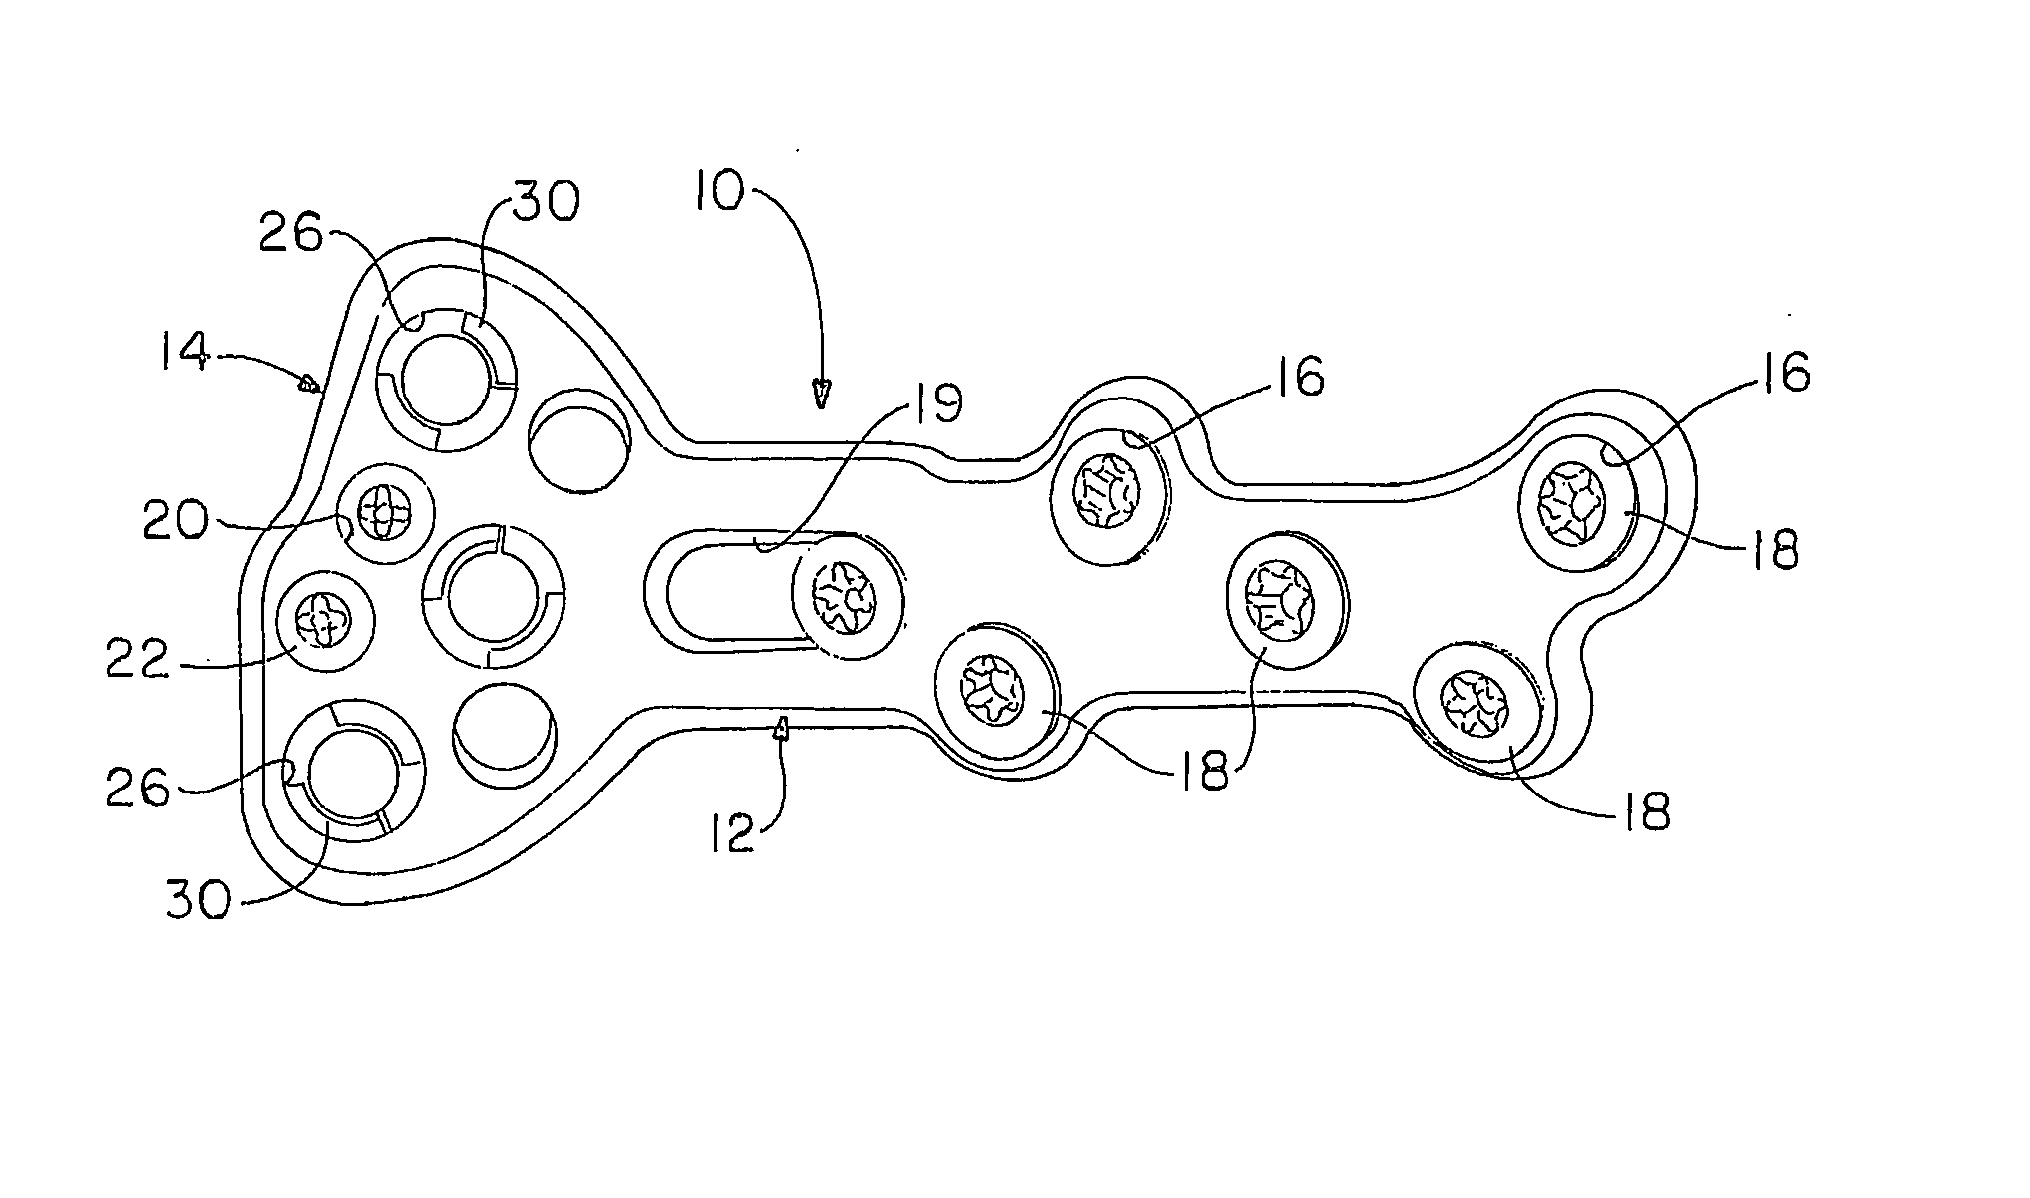 Orthopedic plate having threaded holes for locking screws or pegs and non-threaded holes for a variable axis locking mechanism